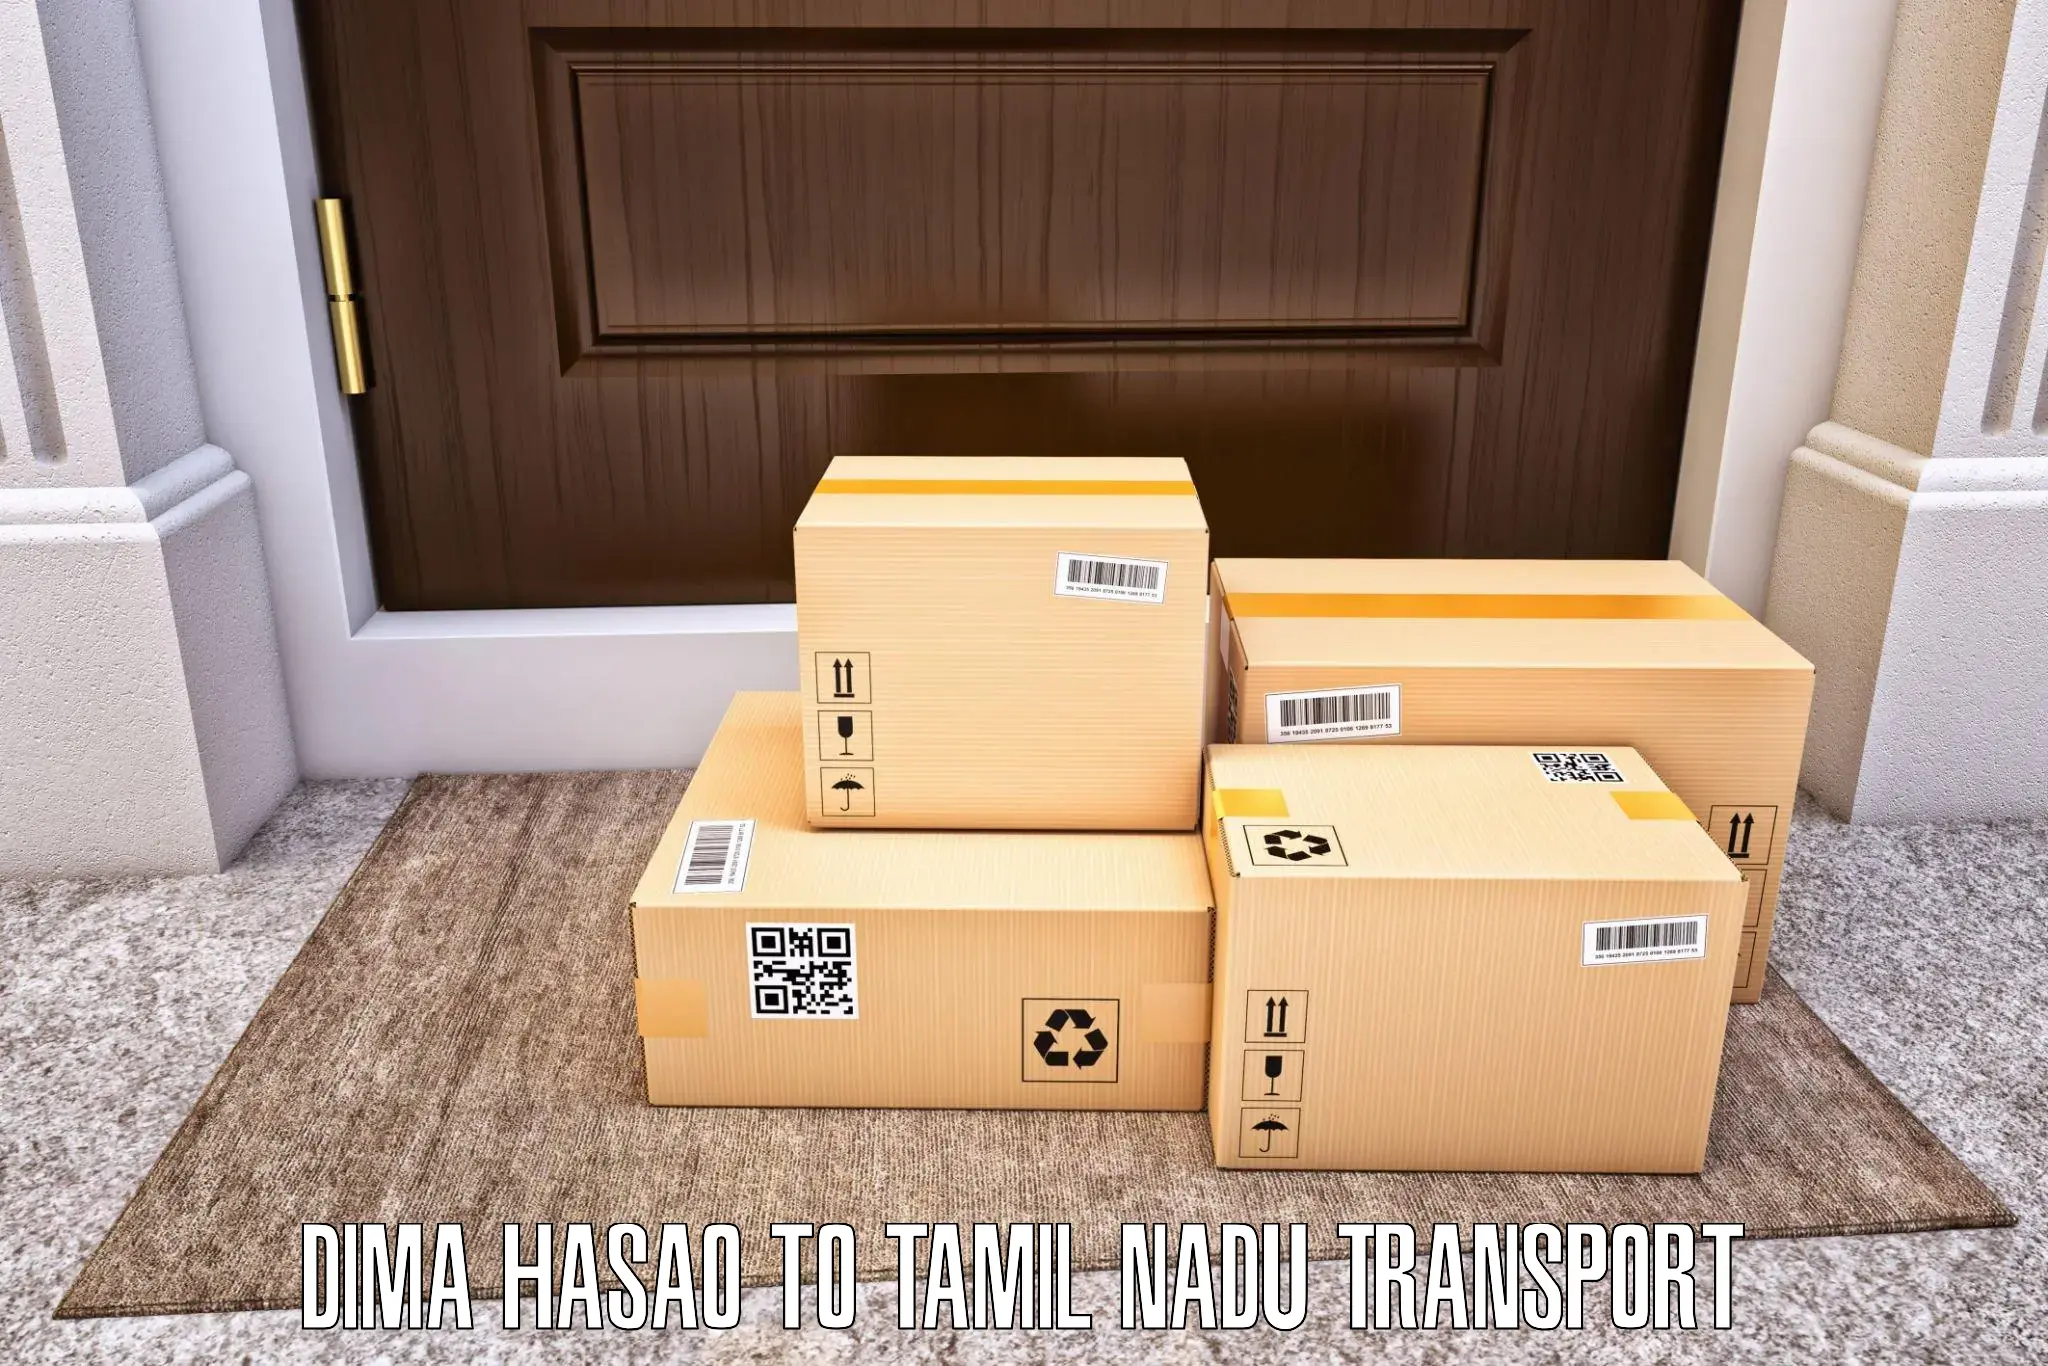 Vehicle transport services Dima Hasao to Tamil Nadu